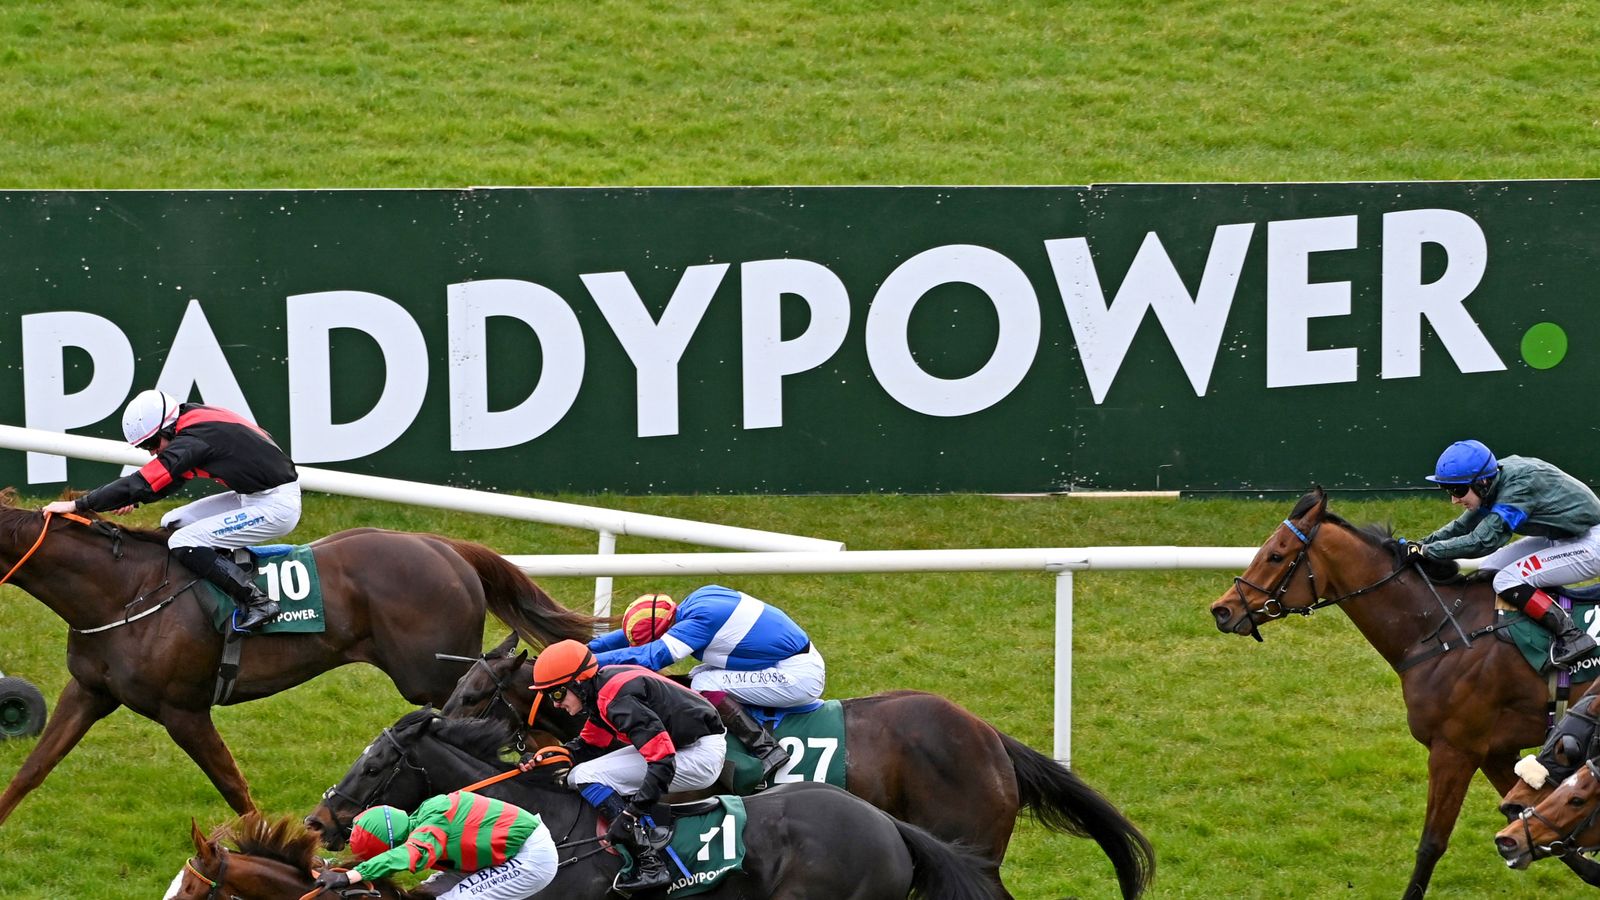 Compass points to US as Paddy Power owner lines up new chairman